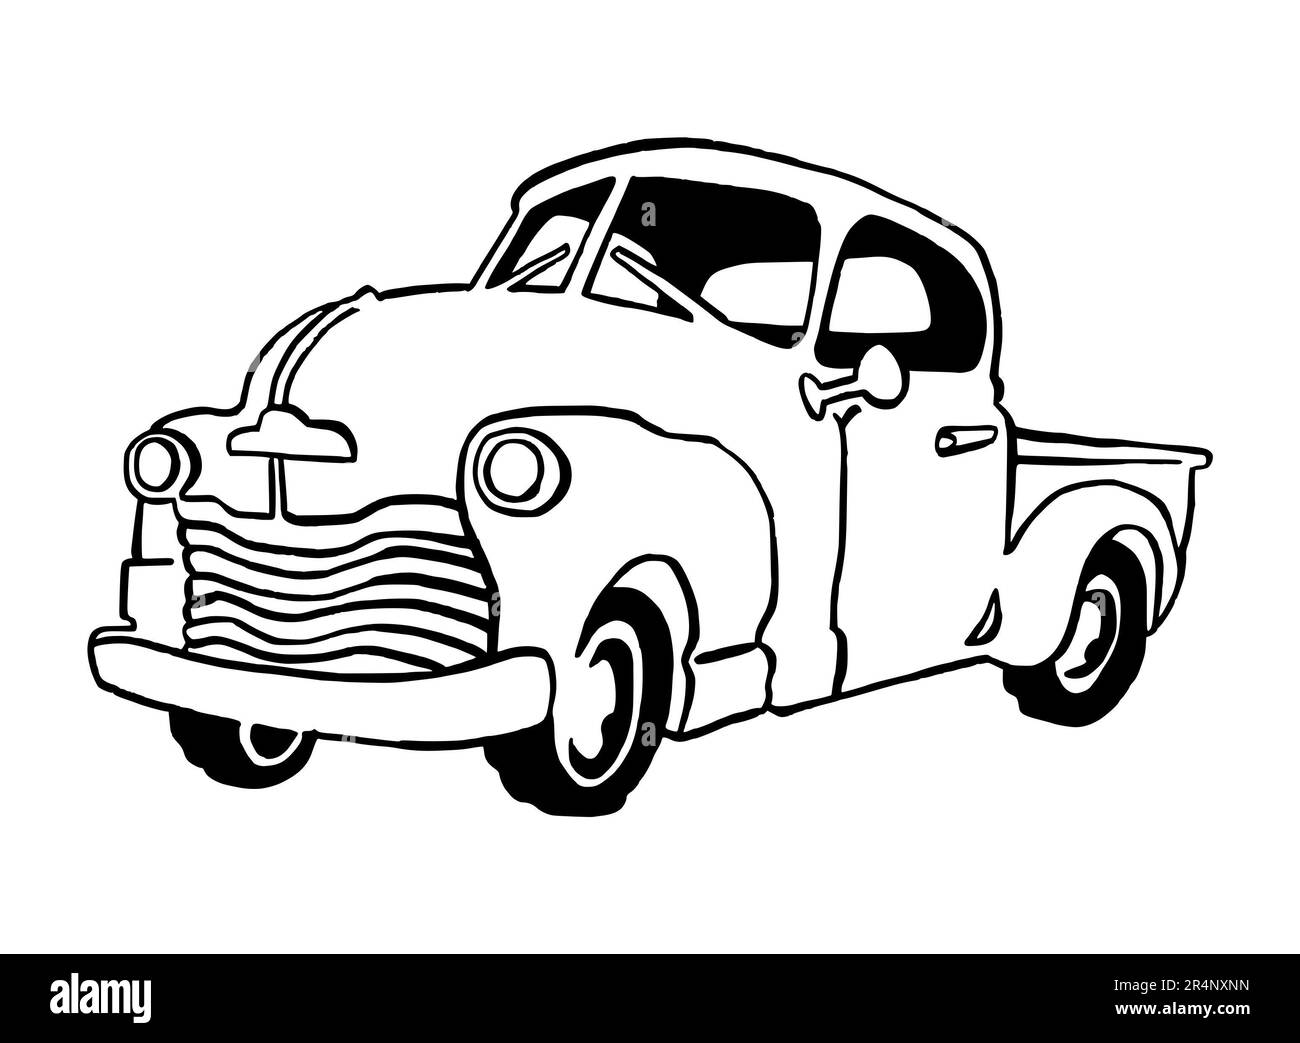 Hand drawn Illustration of a Retro Car, American, Full sized, isolated on a white background, with black line art Stock Photo